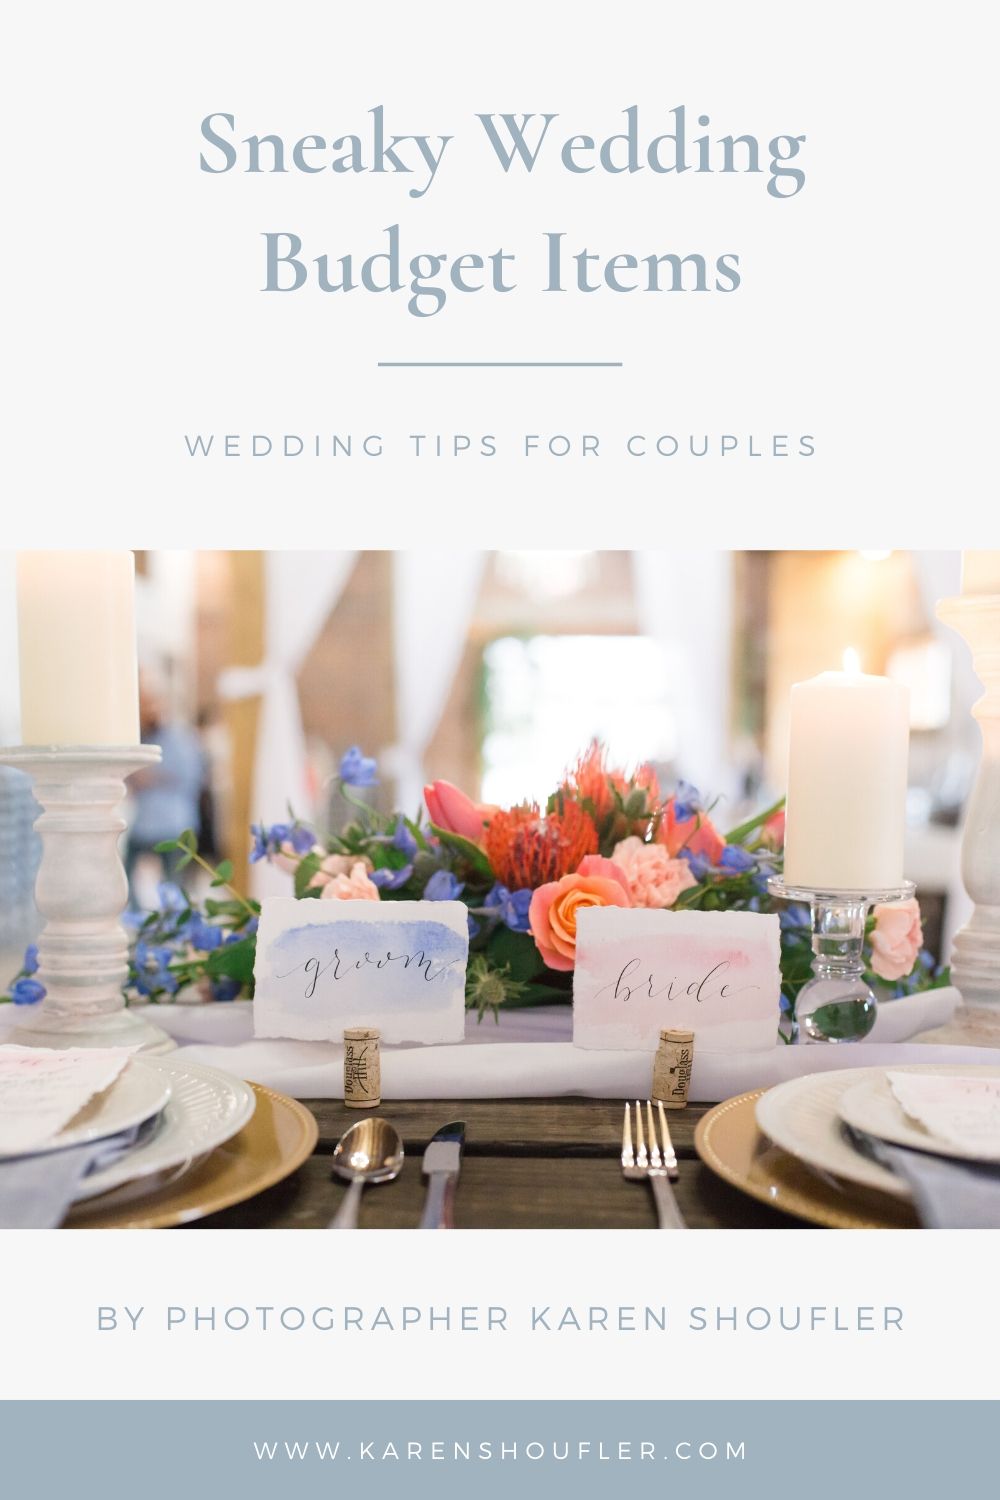 Sneaky Wedding Items to Add to Budget